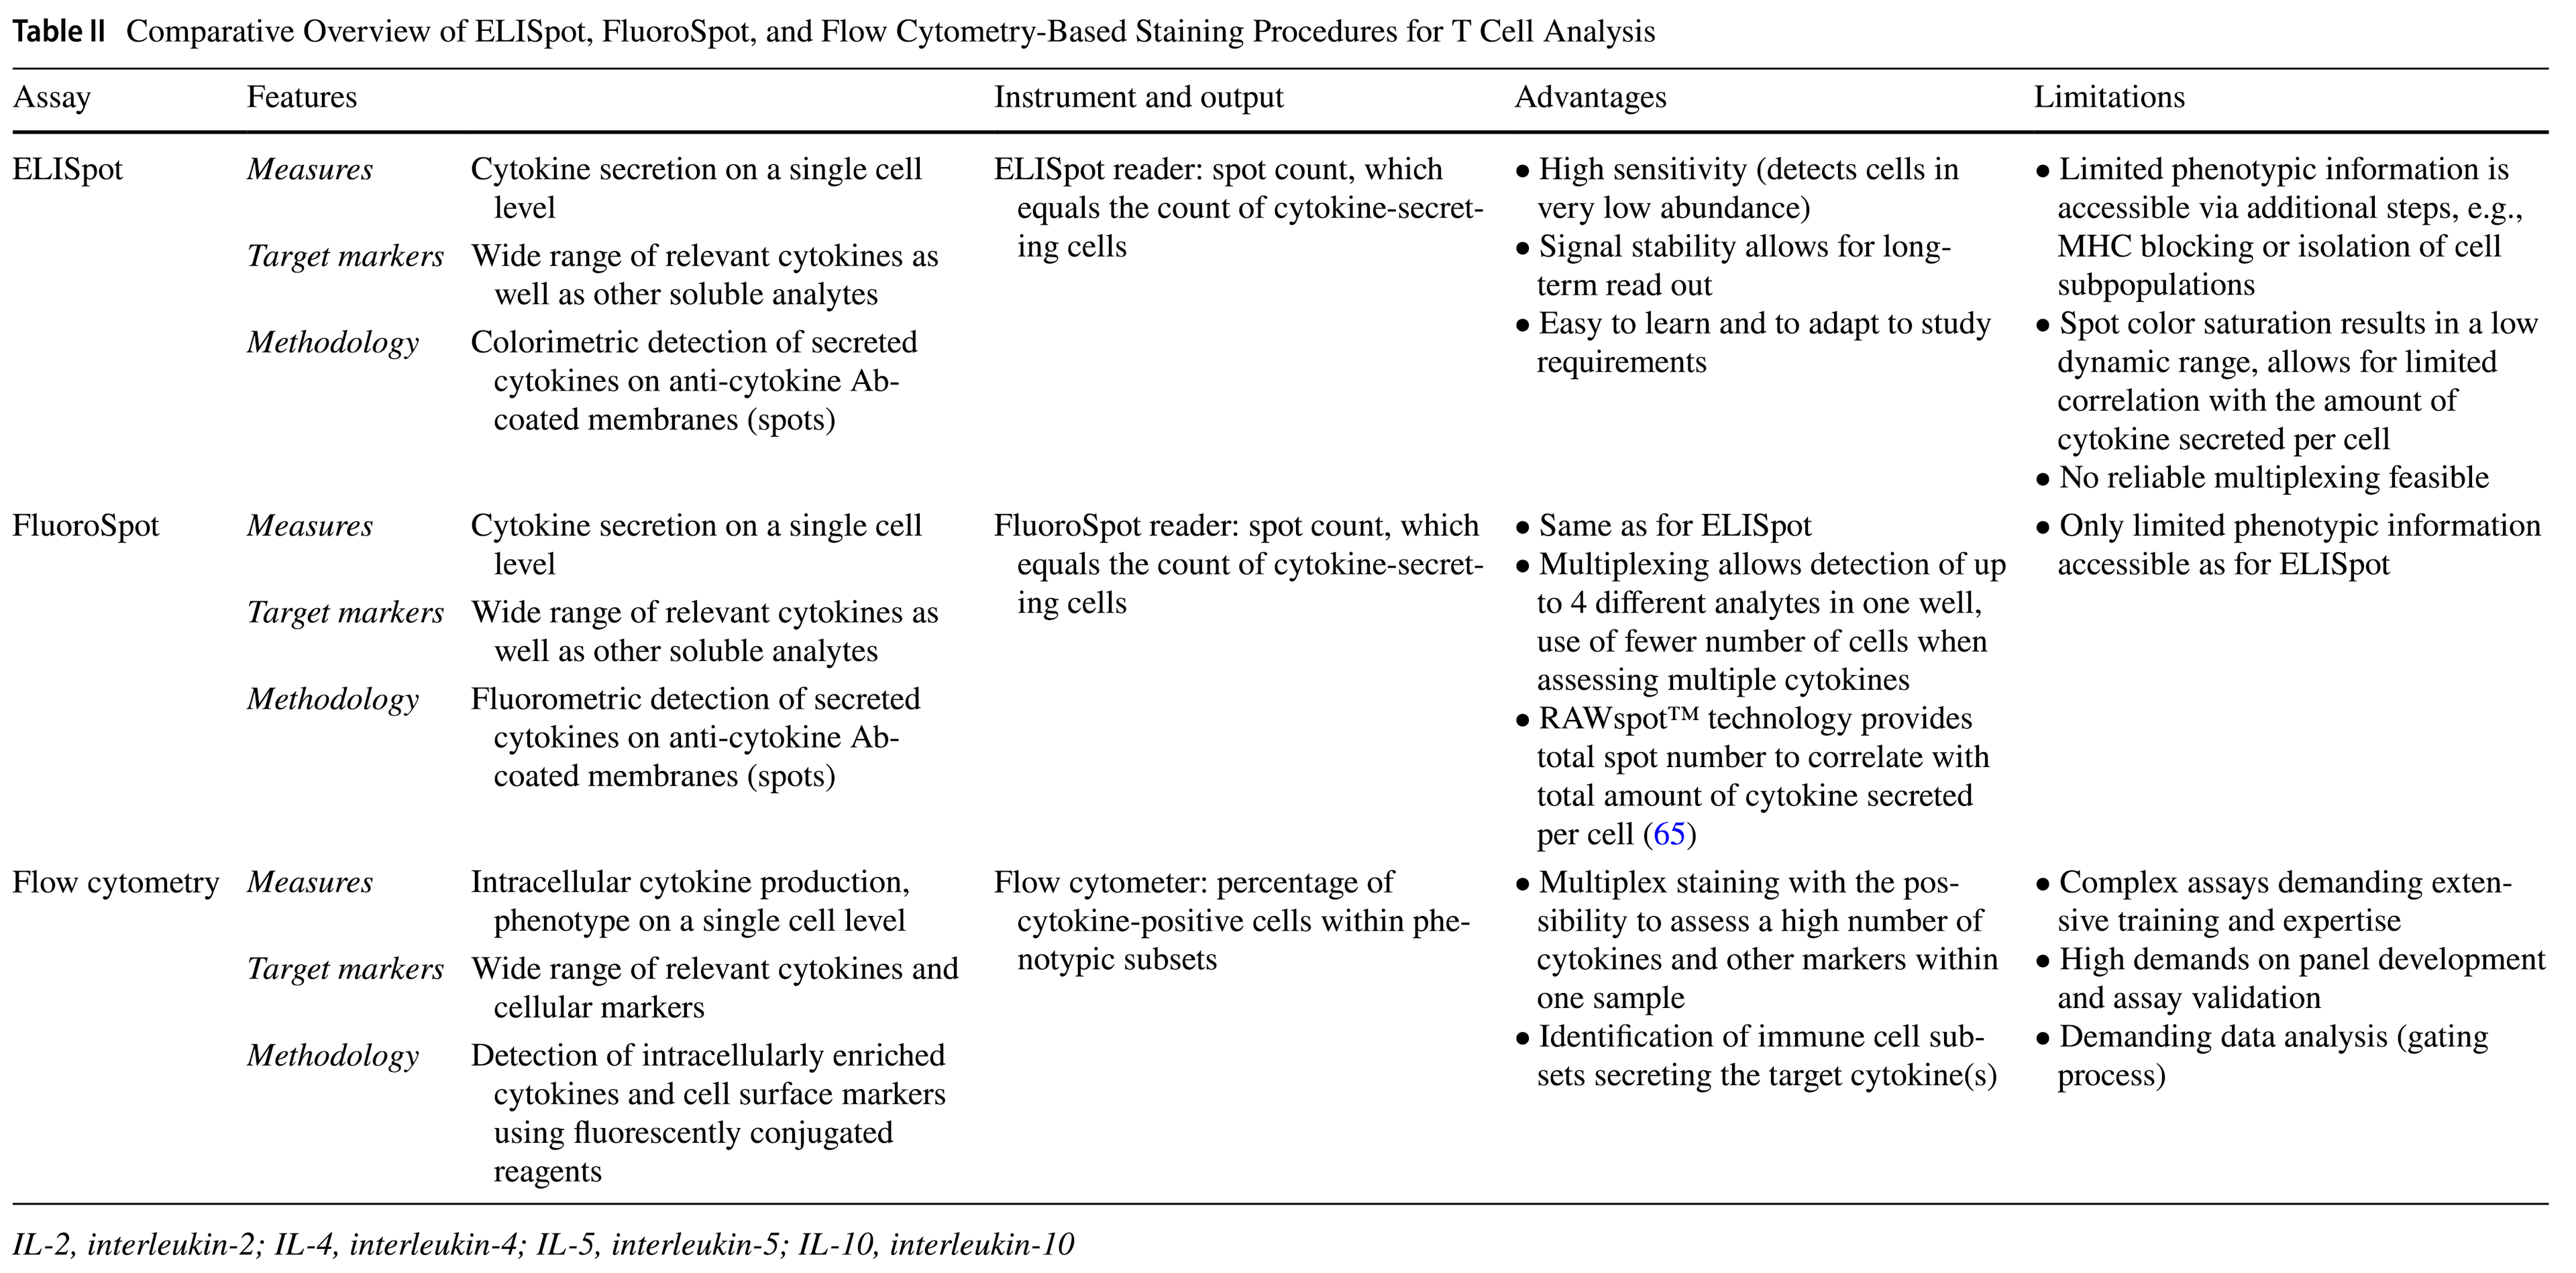 Table 2 from the review article provides an overview as well as the advantages and limitations of ELISpot, FluoroSpot, and intracellular cytokine staining for assessment of antigen-specific T cell responses.